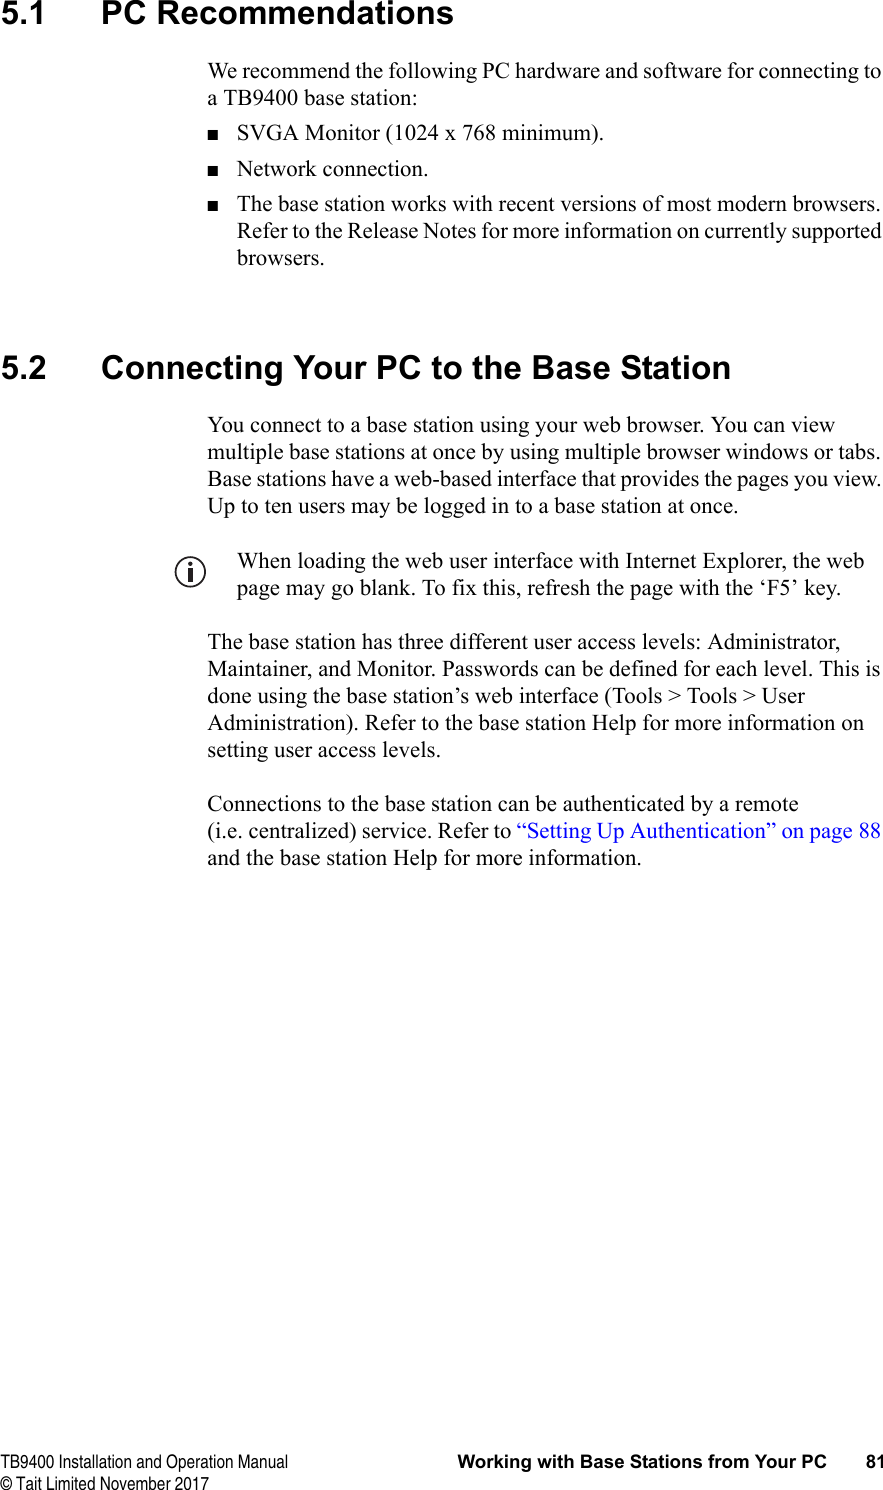  TB9400 Installation and Operation Manual Working with Base Stations from Your PC 81© Tait Limited November 20175.1 PC RecommendationsWe recommend the following PC hardware and software for connecting to a TB9400 base station:■SVGA Monitor (1024 x 768 minimum).■Network connection.■The base station works with recent versions of most modern browsers. Refer to the Release Notes for more information on currently supported browsers.5.2 Connecting Your PC to the Base StationYou connect to a base station using your web browser. You can view multiple base stations at once by using multiple browser windows or tabs. Base stations have a web-based interface that provides the pages you view. Up to ten users may be logged in to a base station at once.When loading the web user interface with Internet Explorer, the web page may go blank. To fix this, refresh the page with the ‘F5’ key.The base station has three different user access levels: Administrator, Maintainer, and Monitor. Passwords can be defined for each level. This is done using the base station’s web interface (Tools &gt; Tools &gt; User Administration). Refer to the base station Help for more information on setting user access levels.Connections to the base station can be authenticated by a remote (i.e. centralized) service. Refer to “Setting Up Authentication” on page 88 and the base station Help for more information.